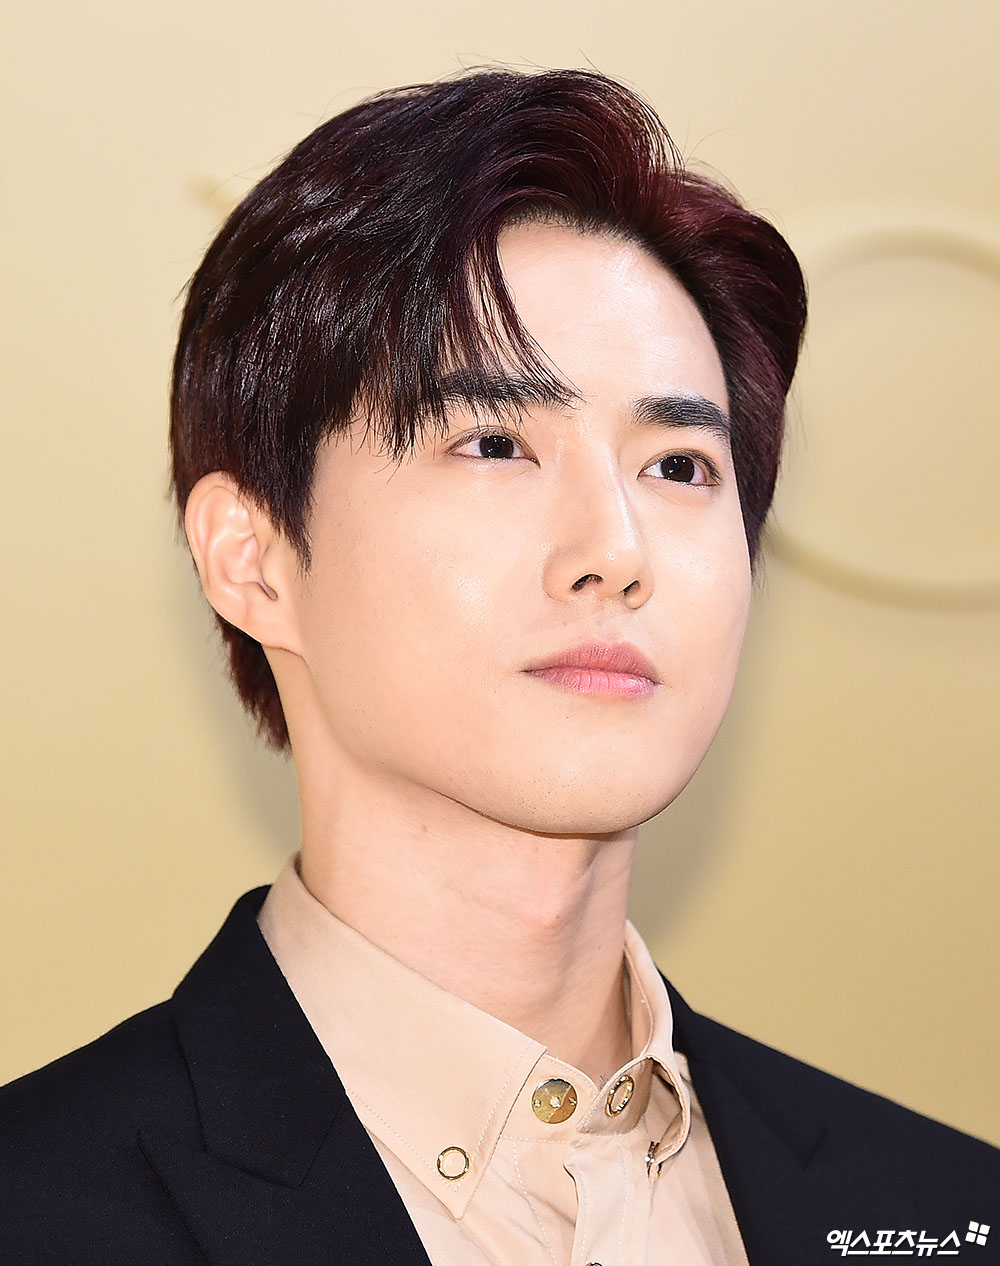 EXO Suho, who attended the launch ceremony of the new iconic watch Serpenti Sedutori of the Italian luxury brand Bulgari held at Seoul Jamwon Seoul wave on the afternoon of the 29th, has photo time.